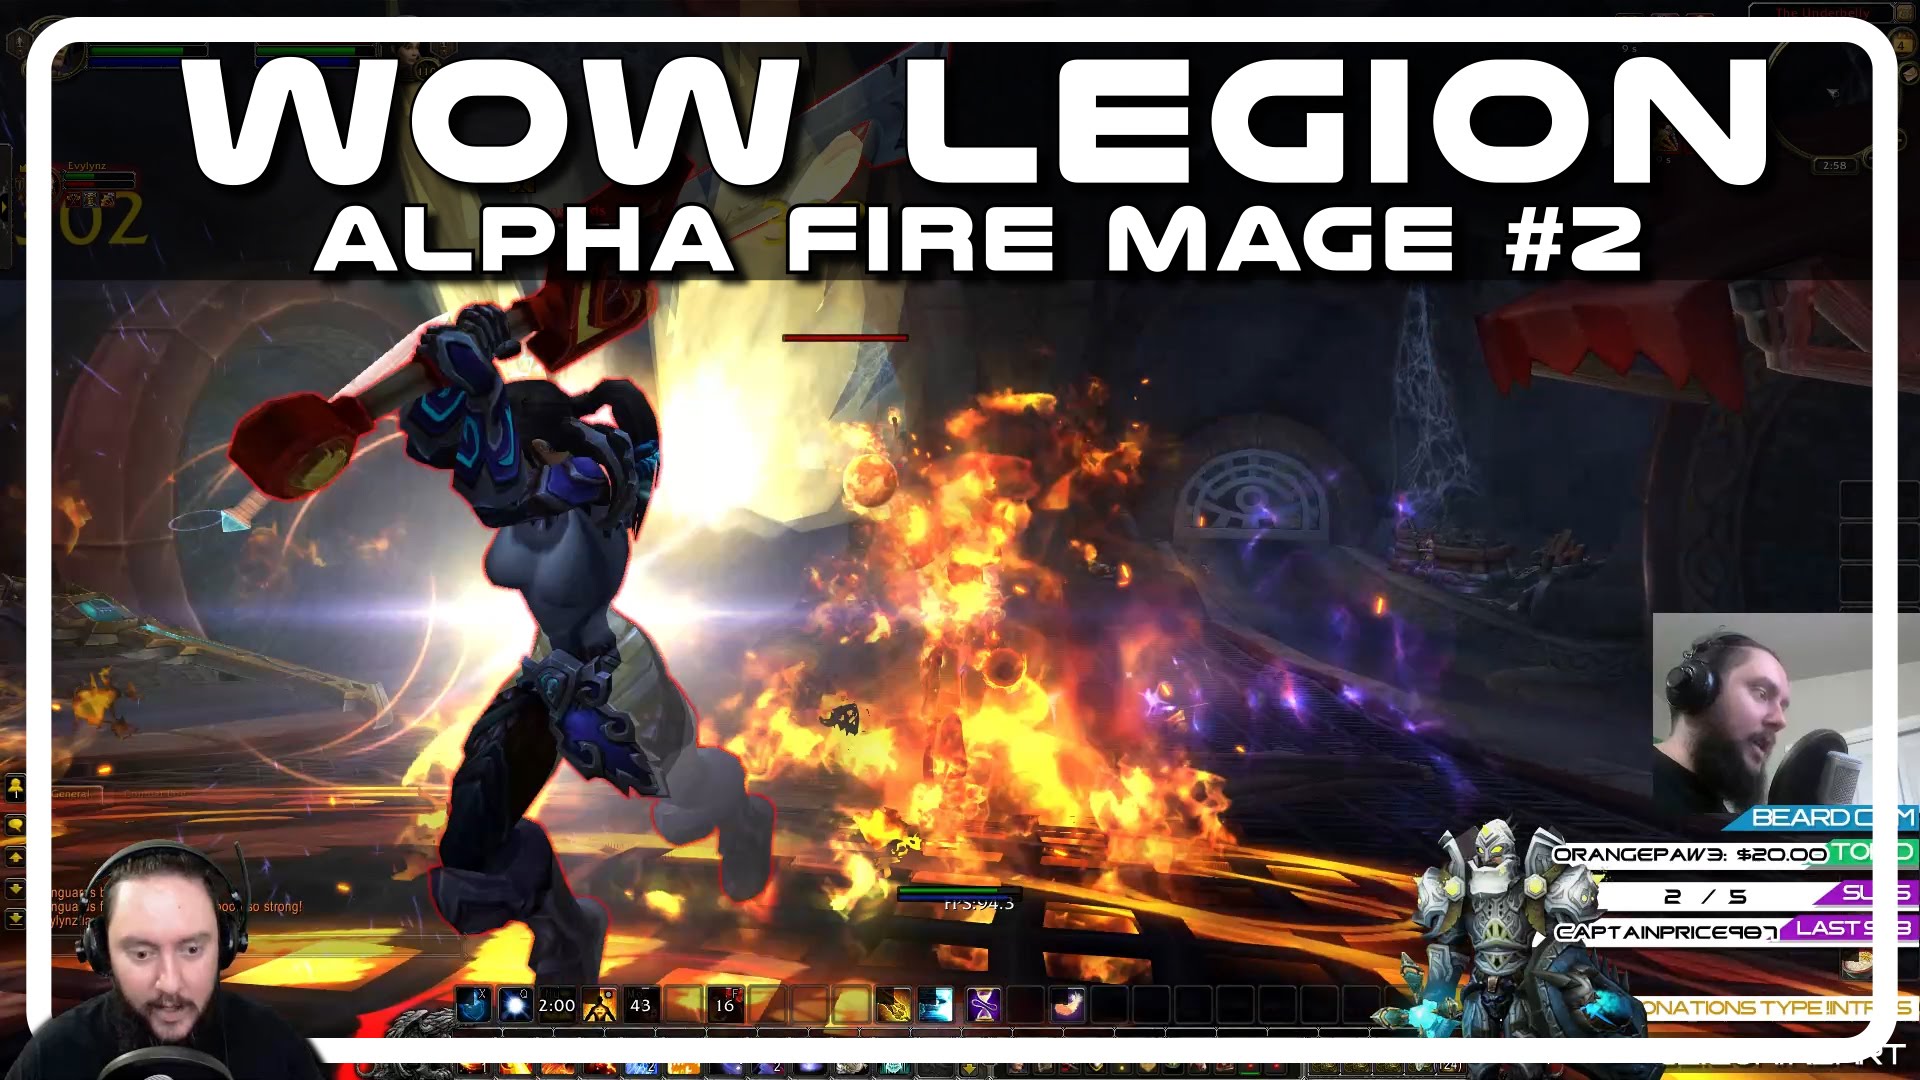 WoW Legion Alpha PvP – Fire Mage #2 with Psynaps (PvP Gameplay)